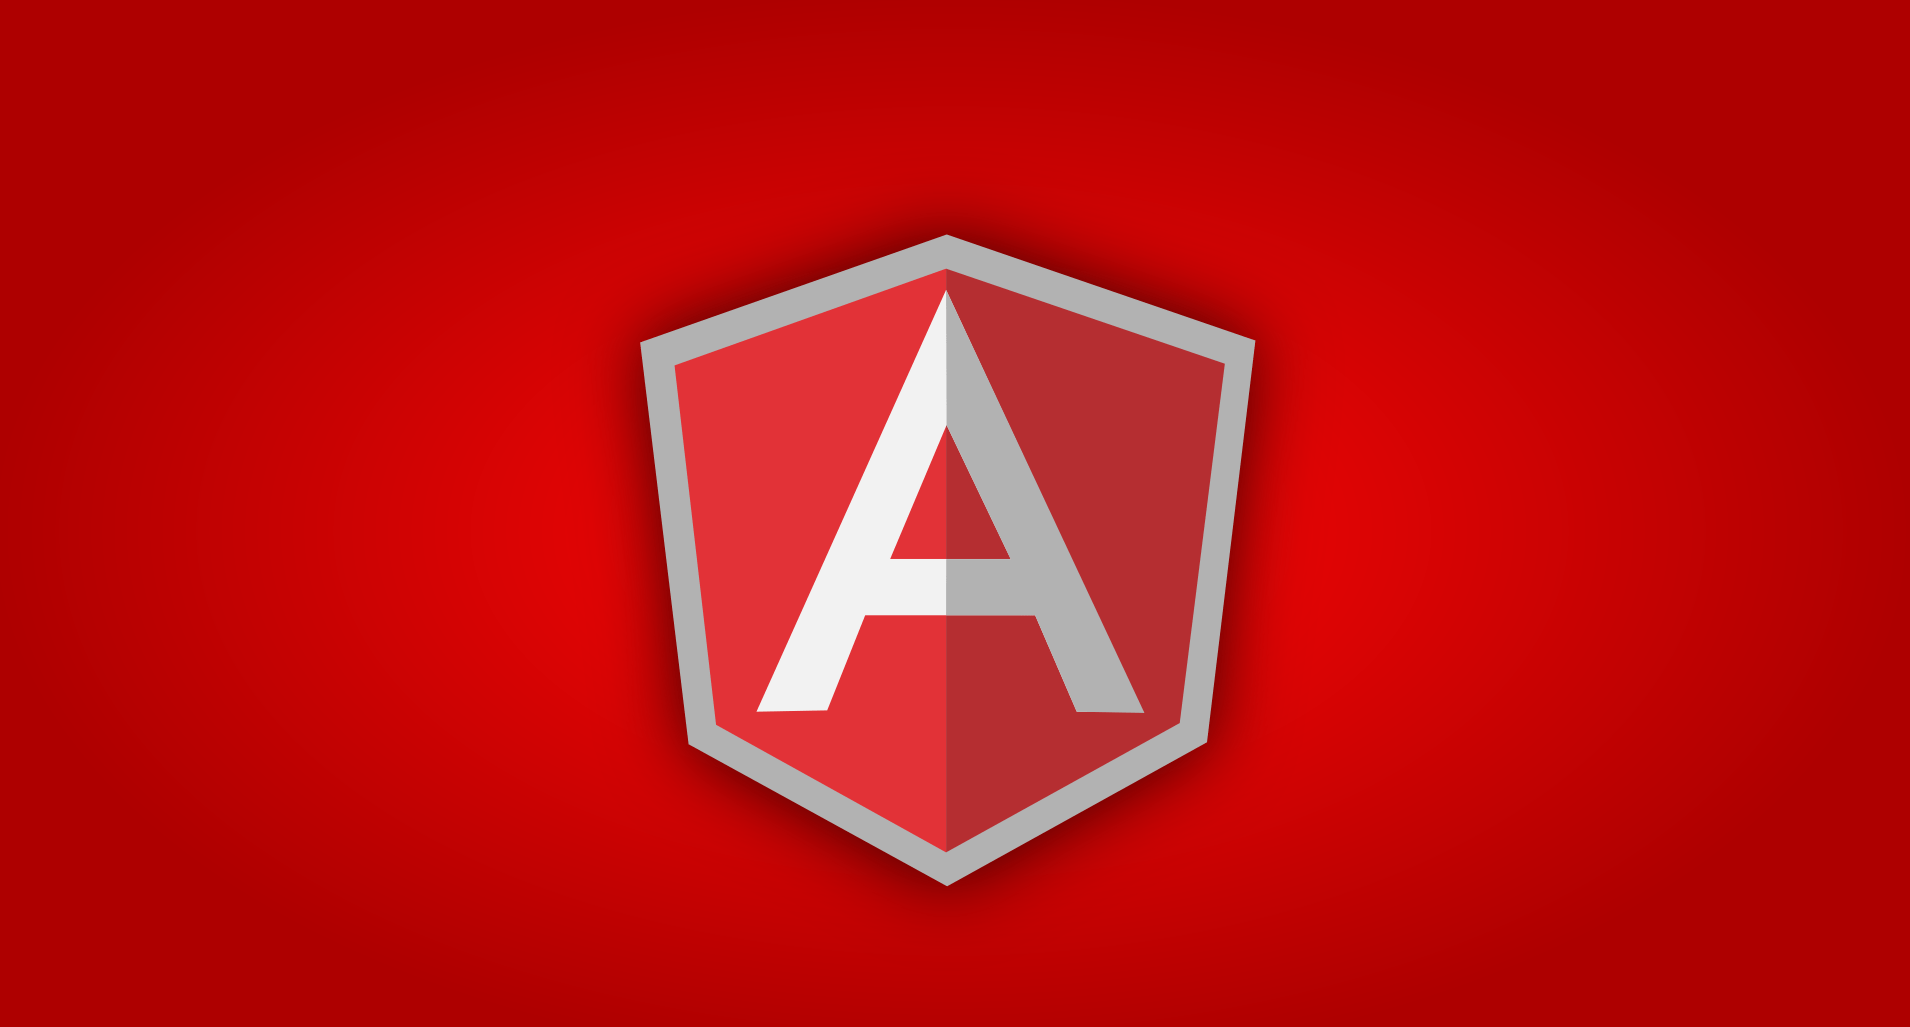 General 1910x1027 Angular Software programming logo red background simple background